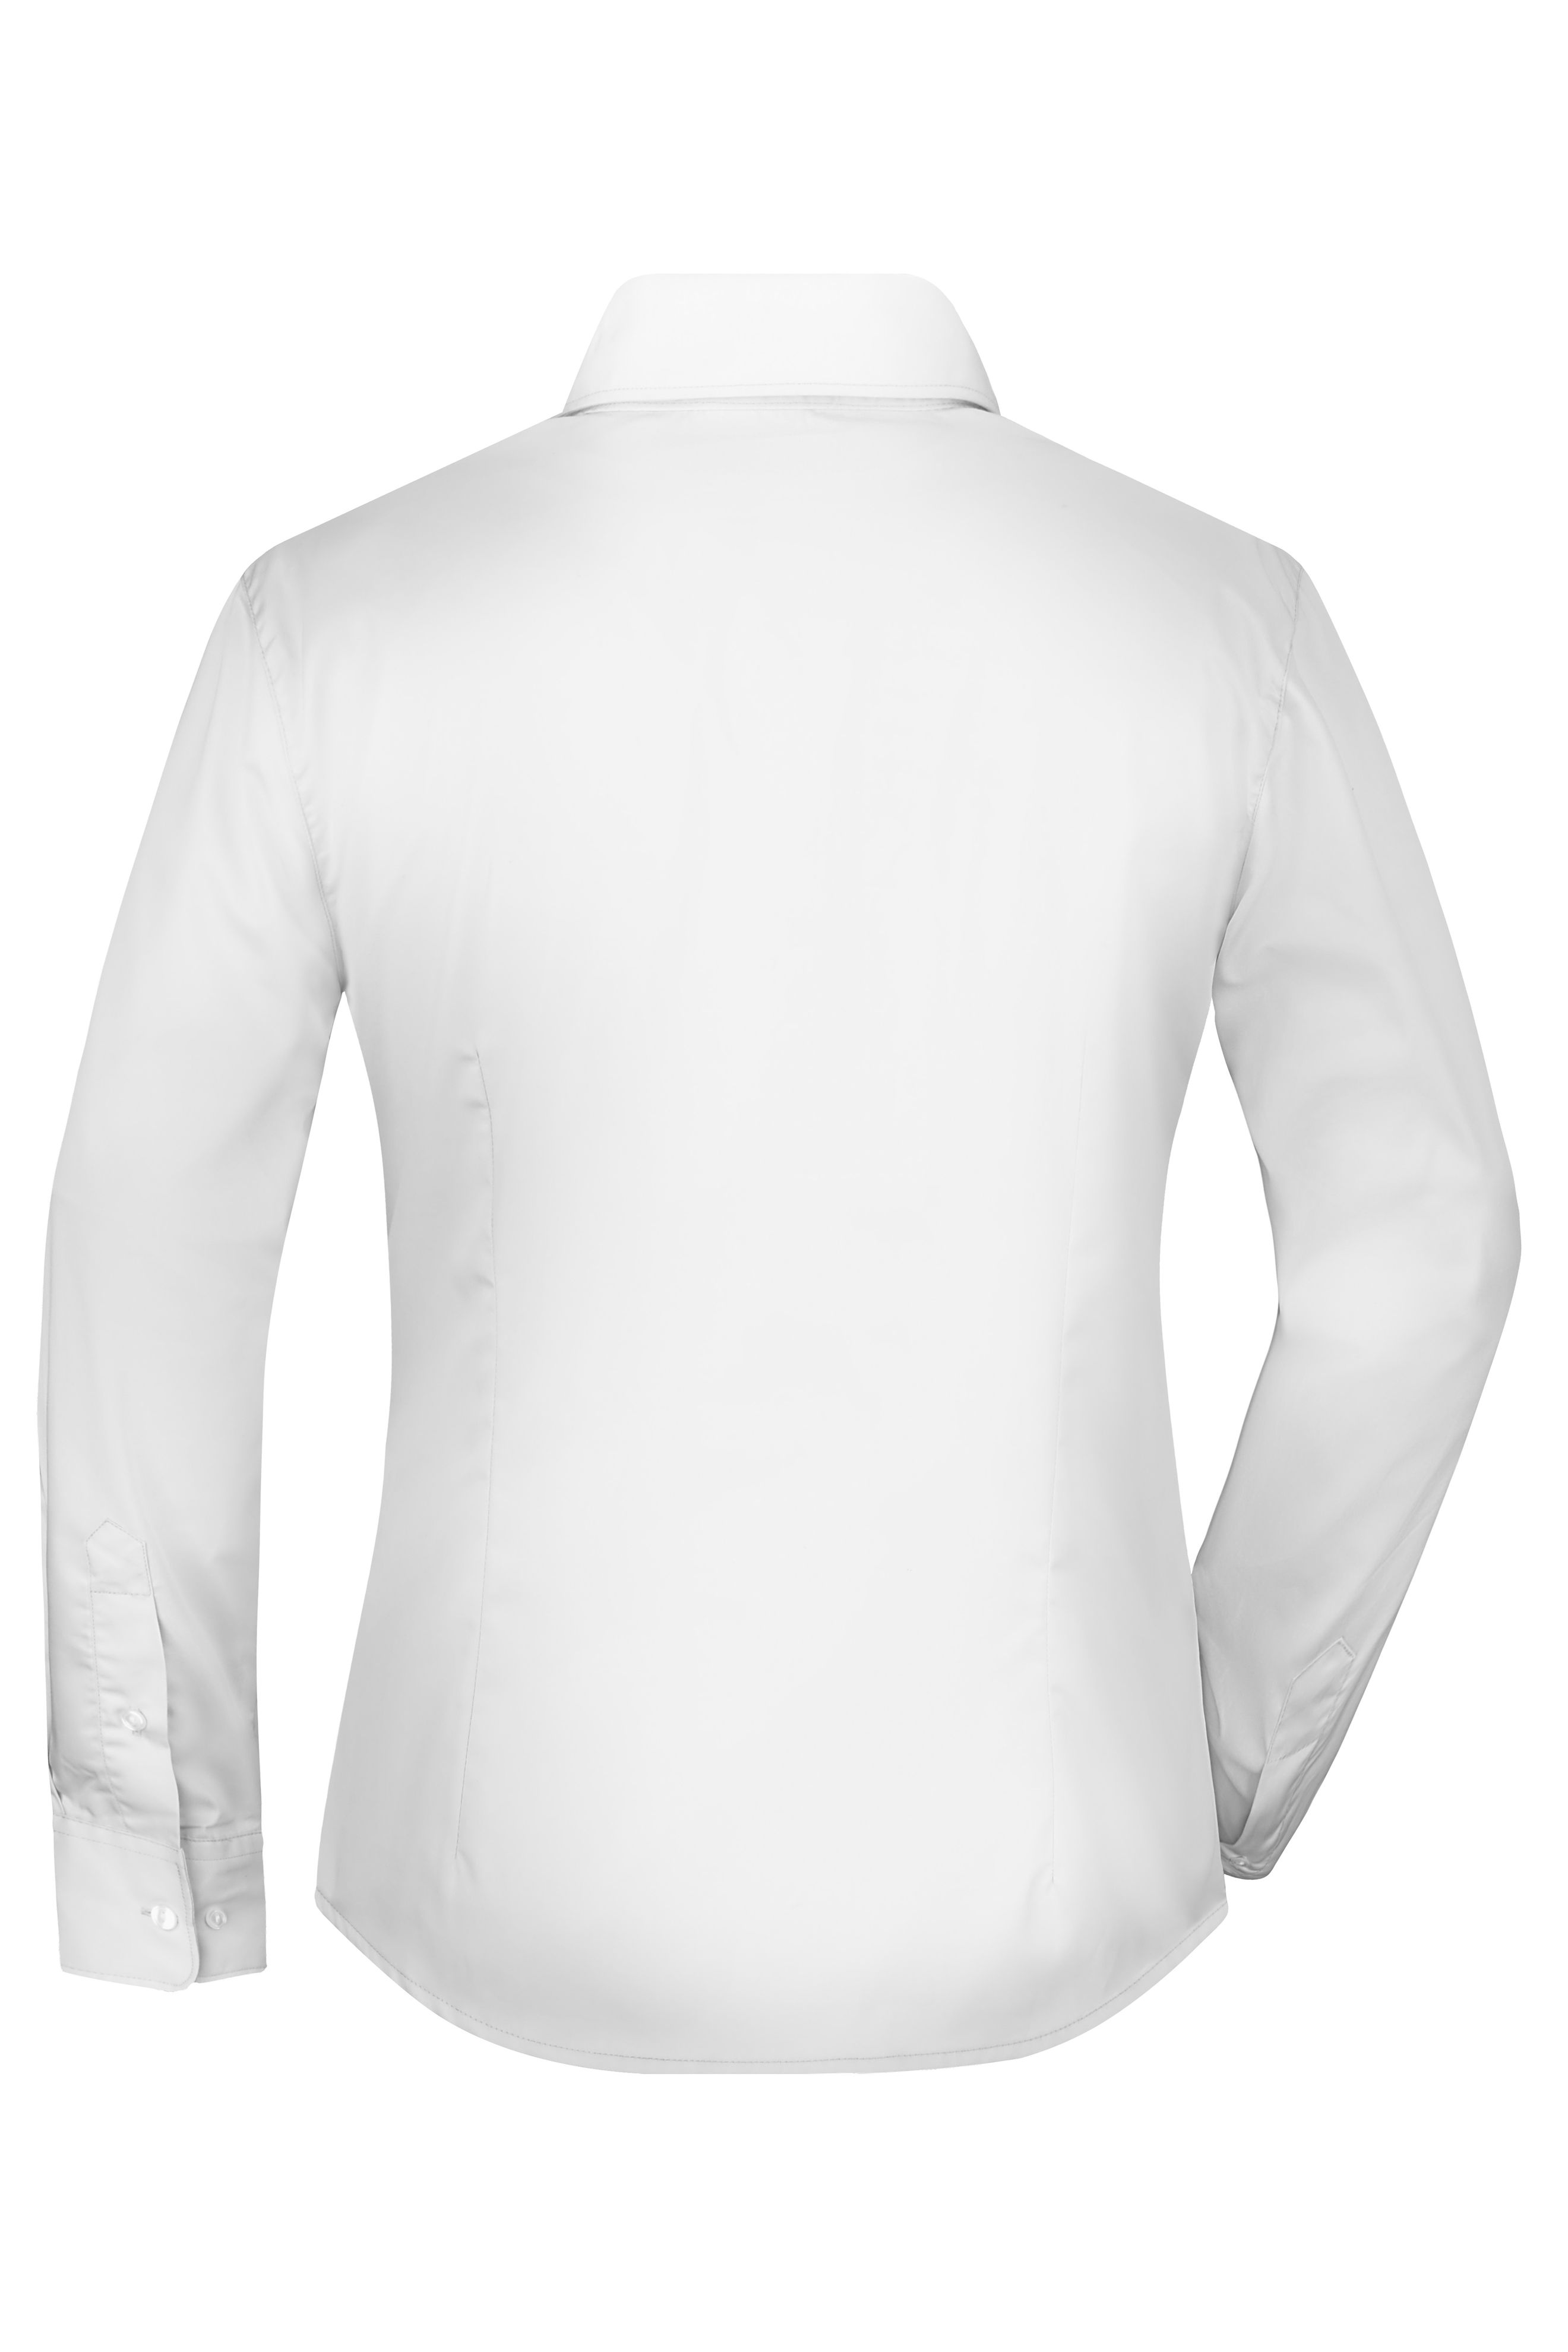 Ladies Ladies' Business Blouse Long-Sleeved White-Daiber